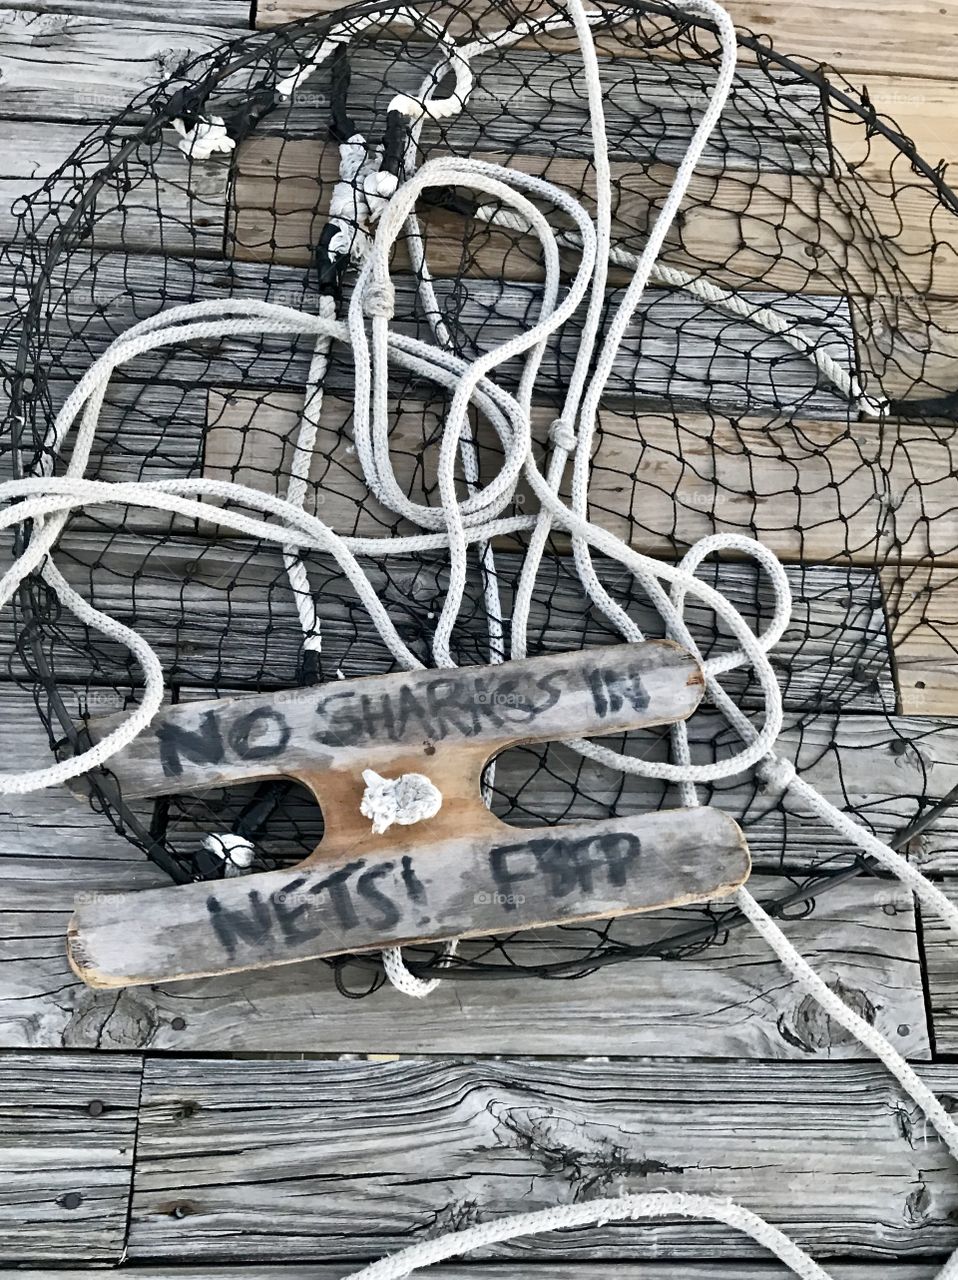 A sign on a fishing net seen while strolling the beach pier